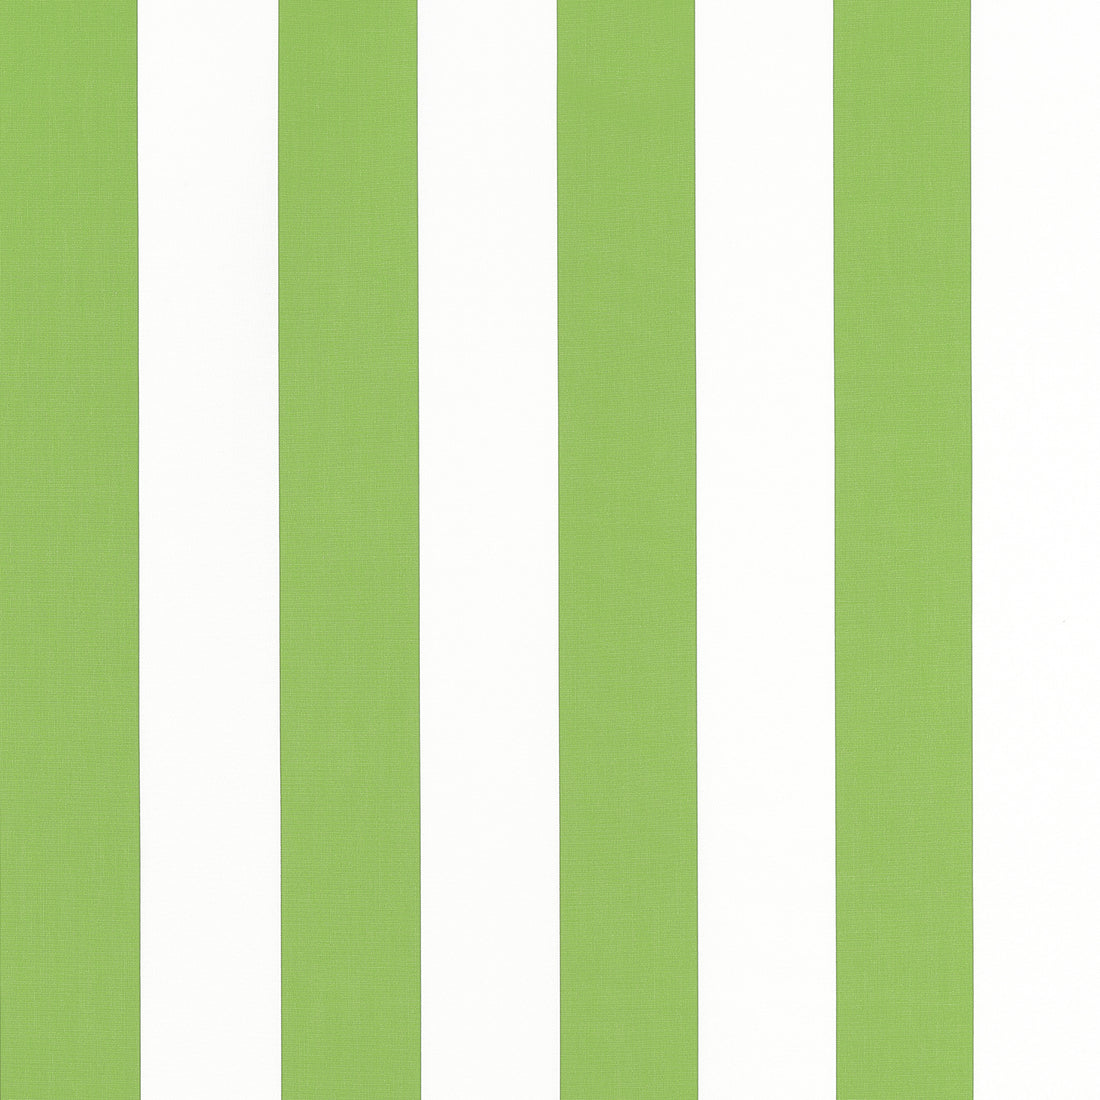 Cabana Stripe fabric in kiwi color - pattern number W81633 - by Thibaut in the Locale collection